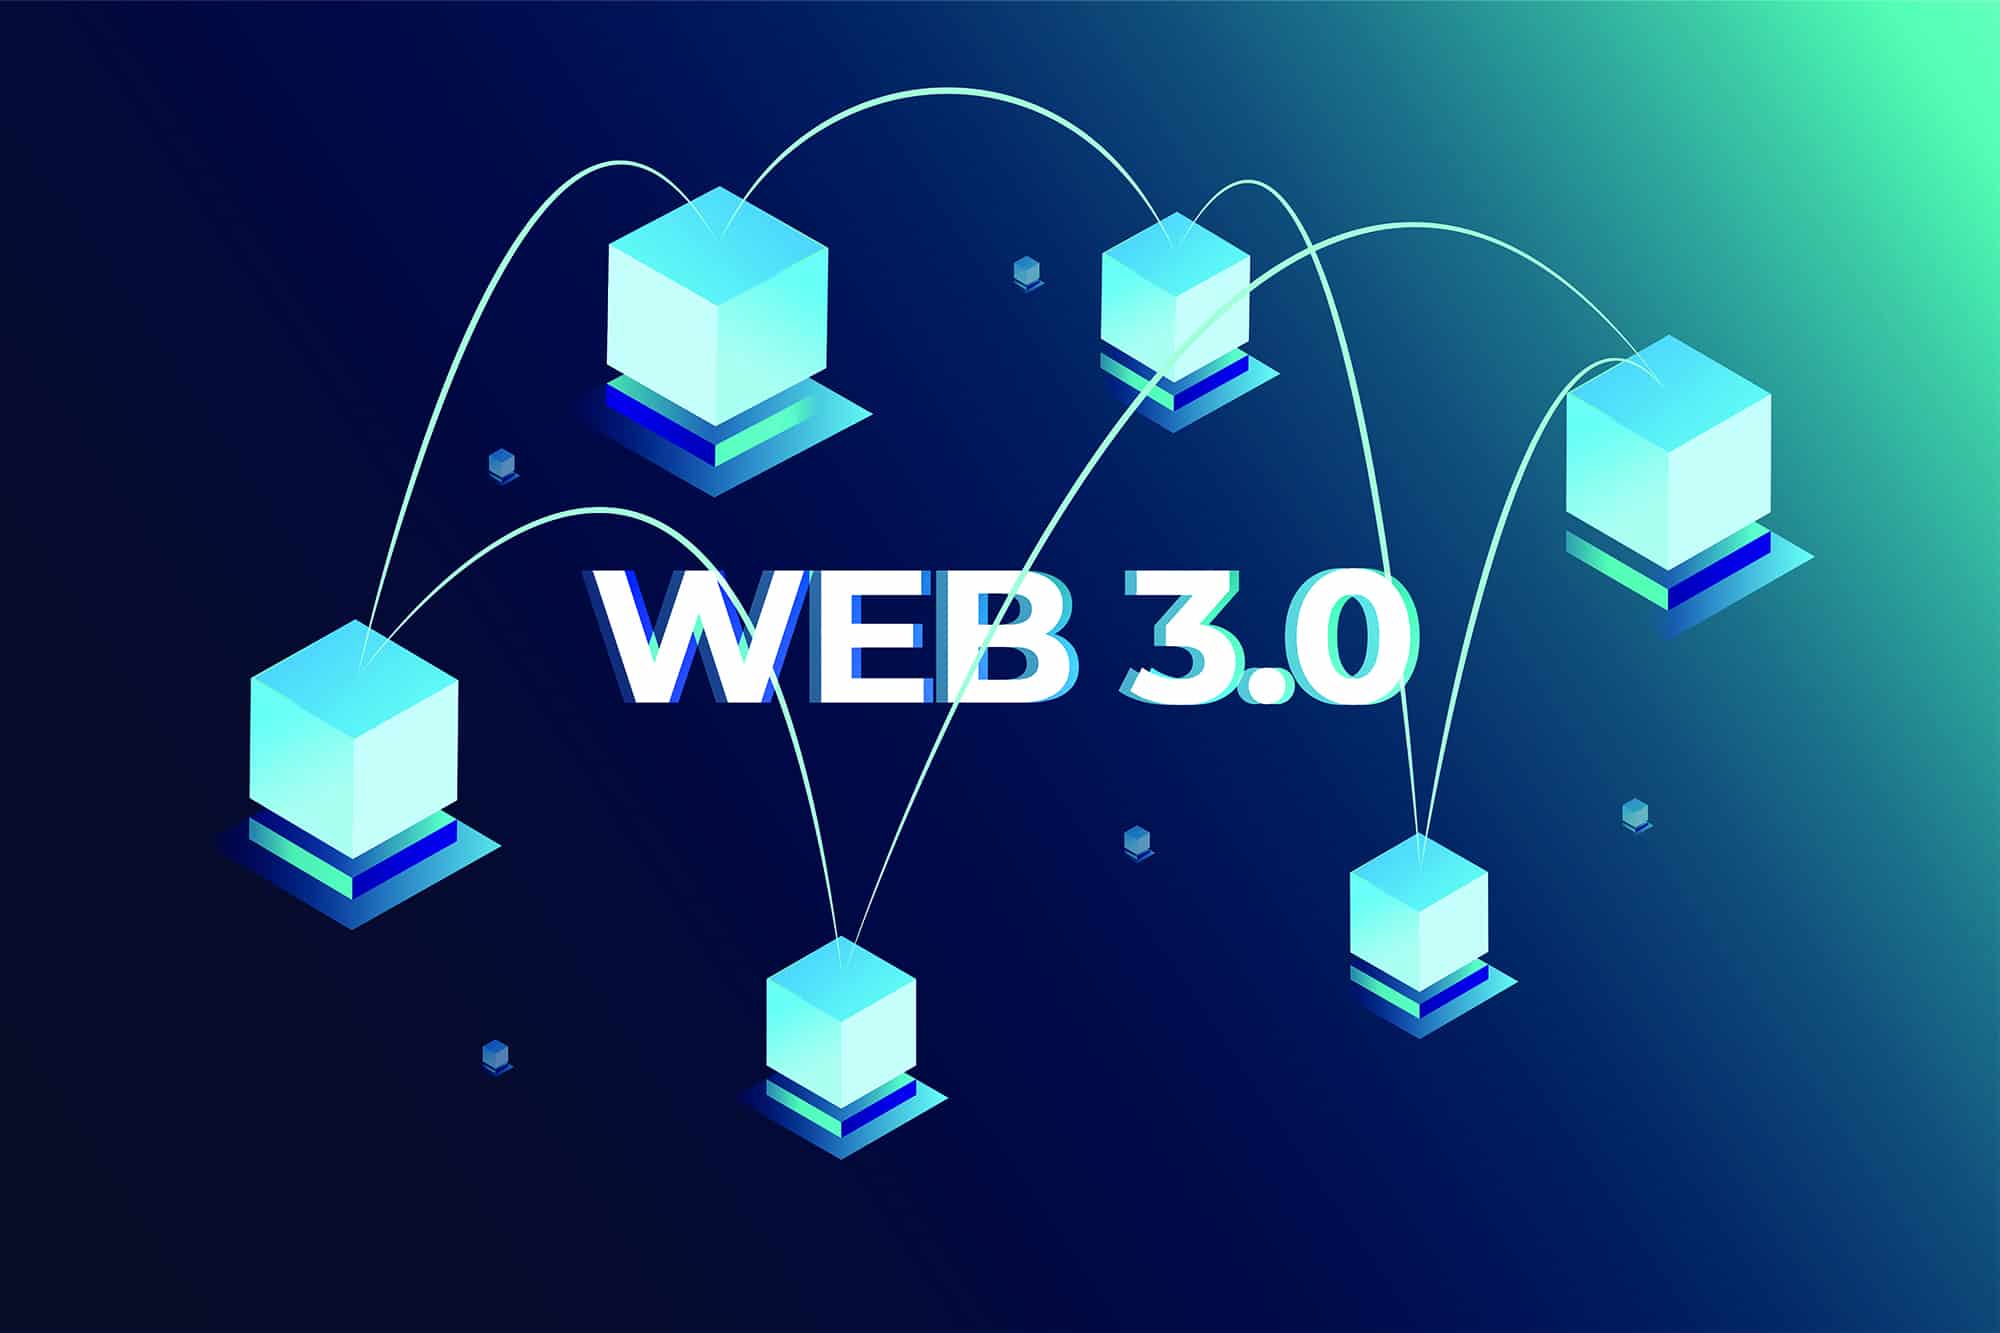 Visualization of Web 3.0 and the blockchain